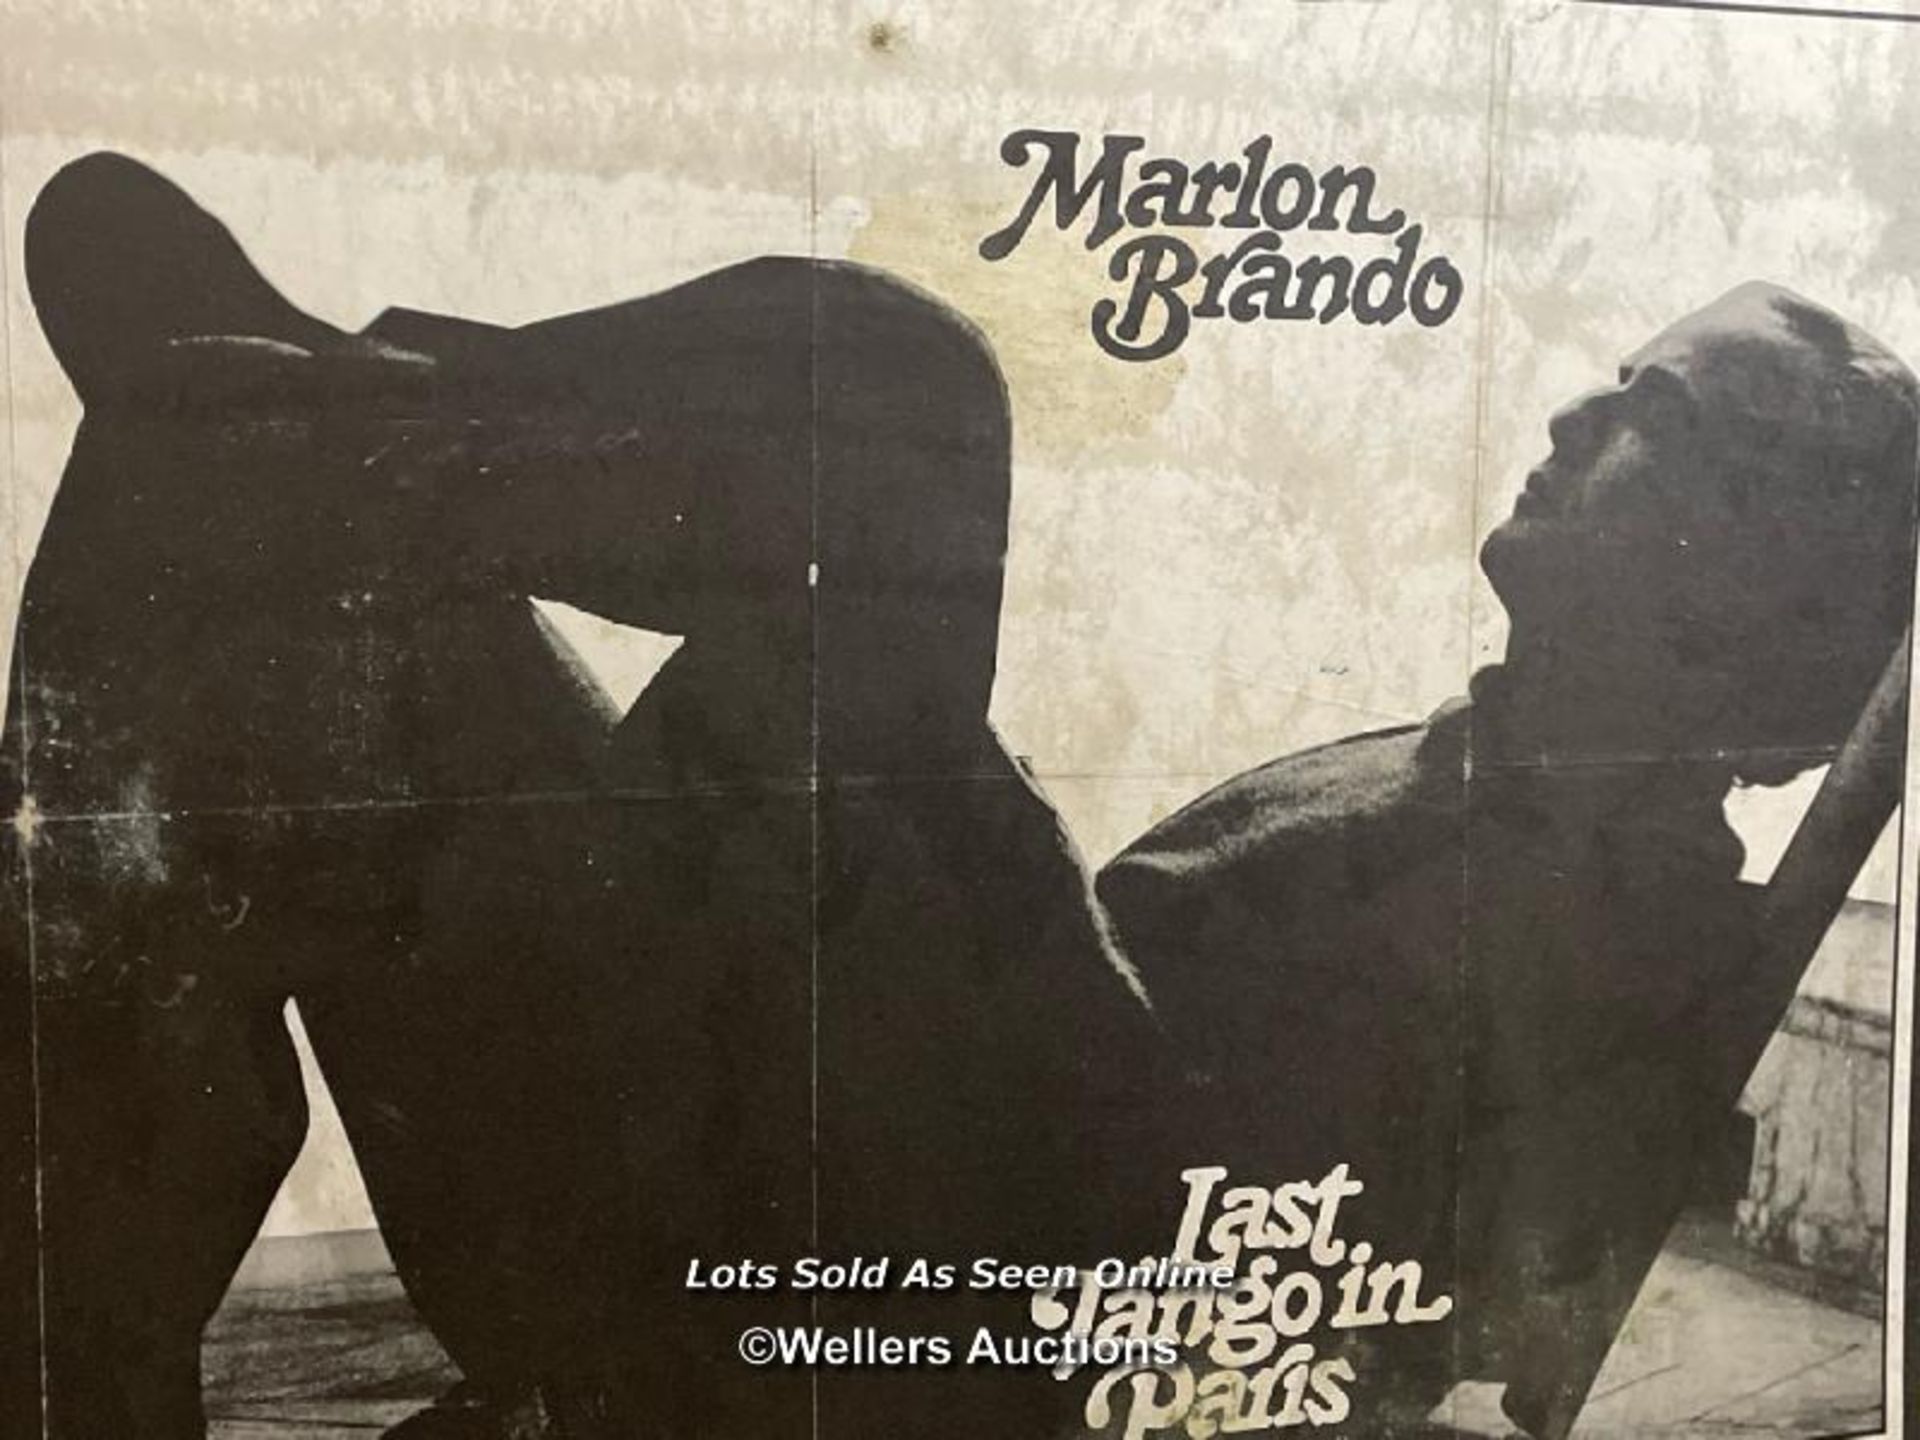 'LAST TANGO IN PARIS' MARLON BRANDO FILM POSTER, PASTED ONTO BOARD FOR THEATRICAL USE, POSTER SIZE - Image 2 of 3